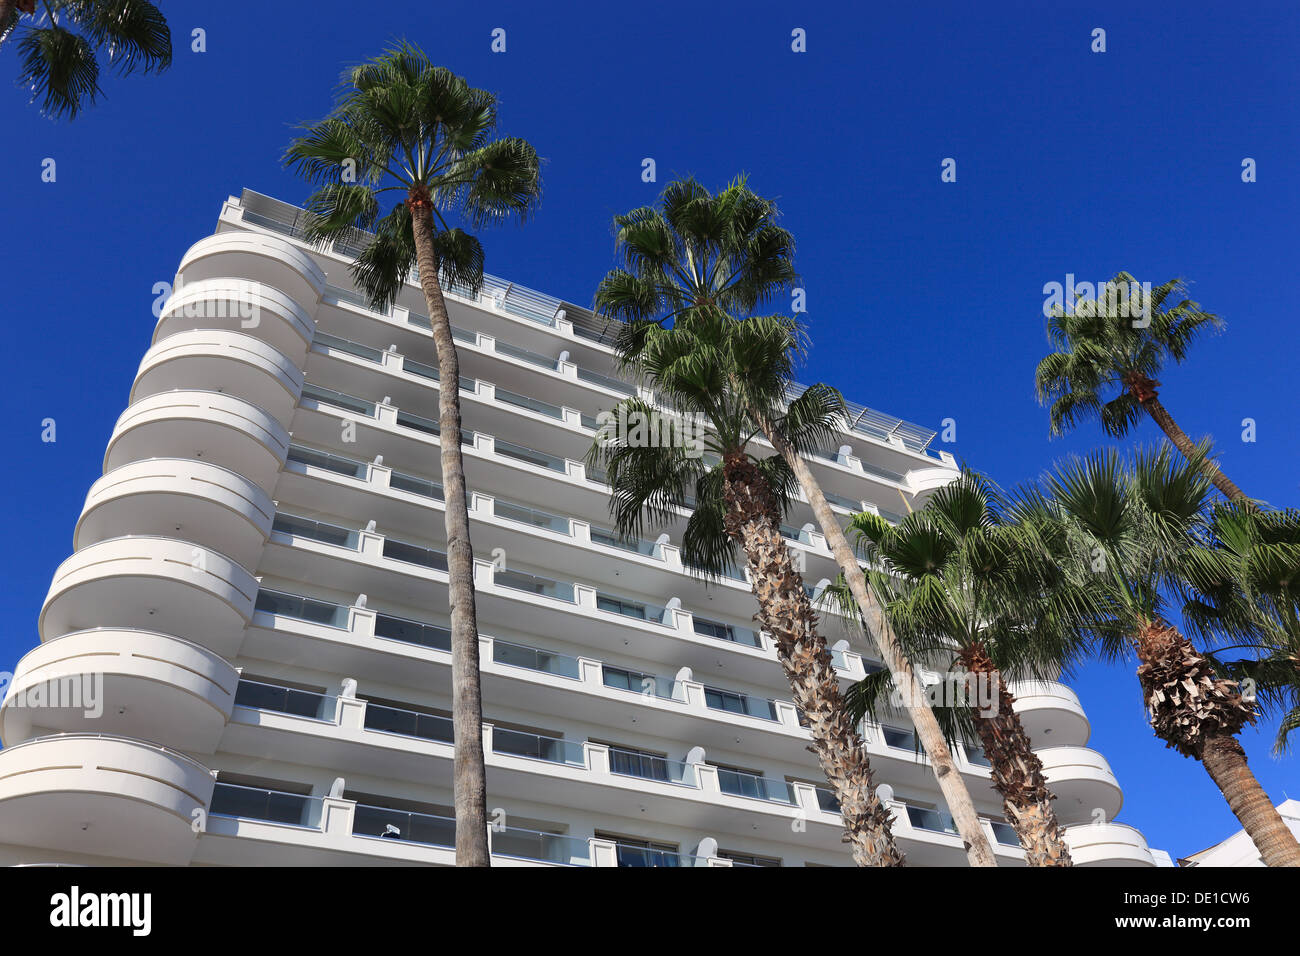 Cyprus, Larnaca, hotel, residential buildings, palm trees Stock Photo